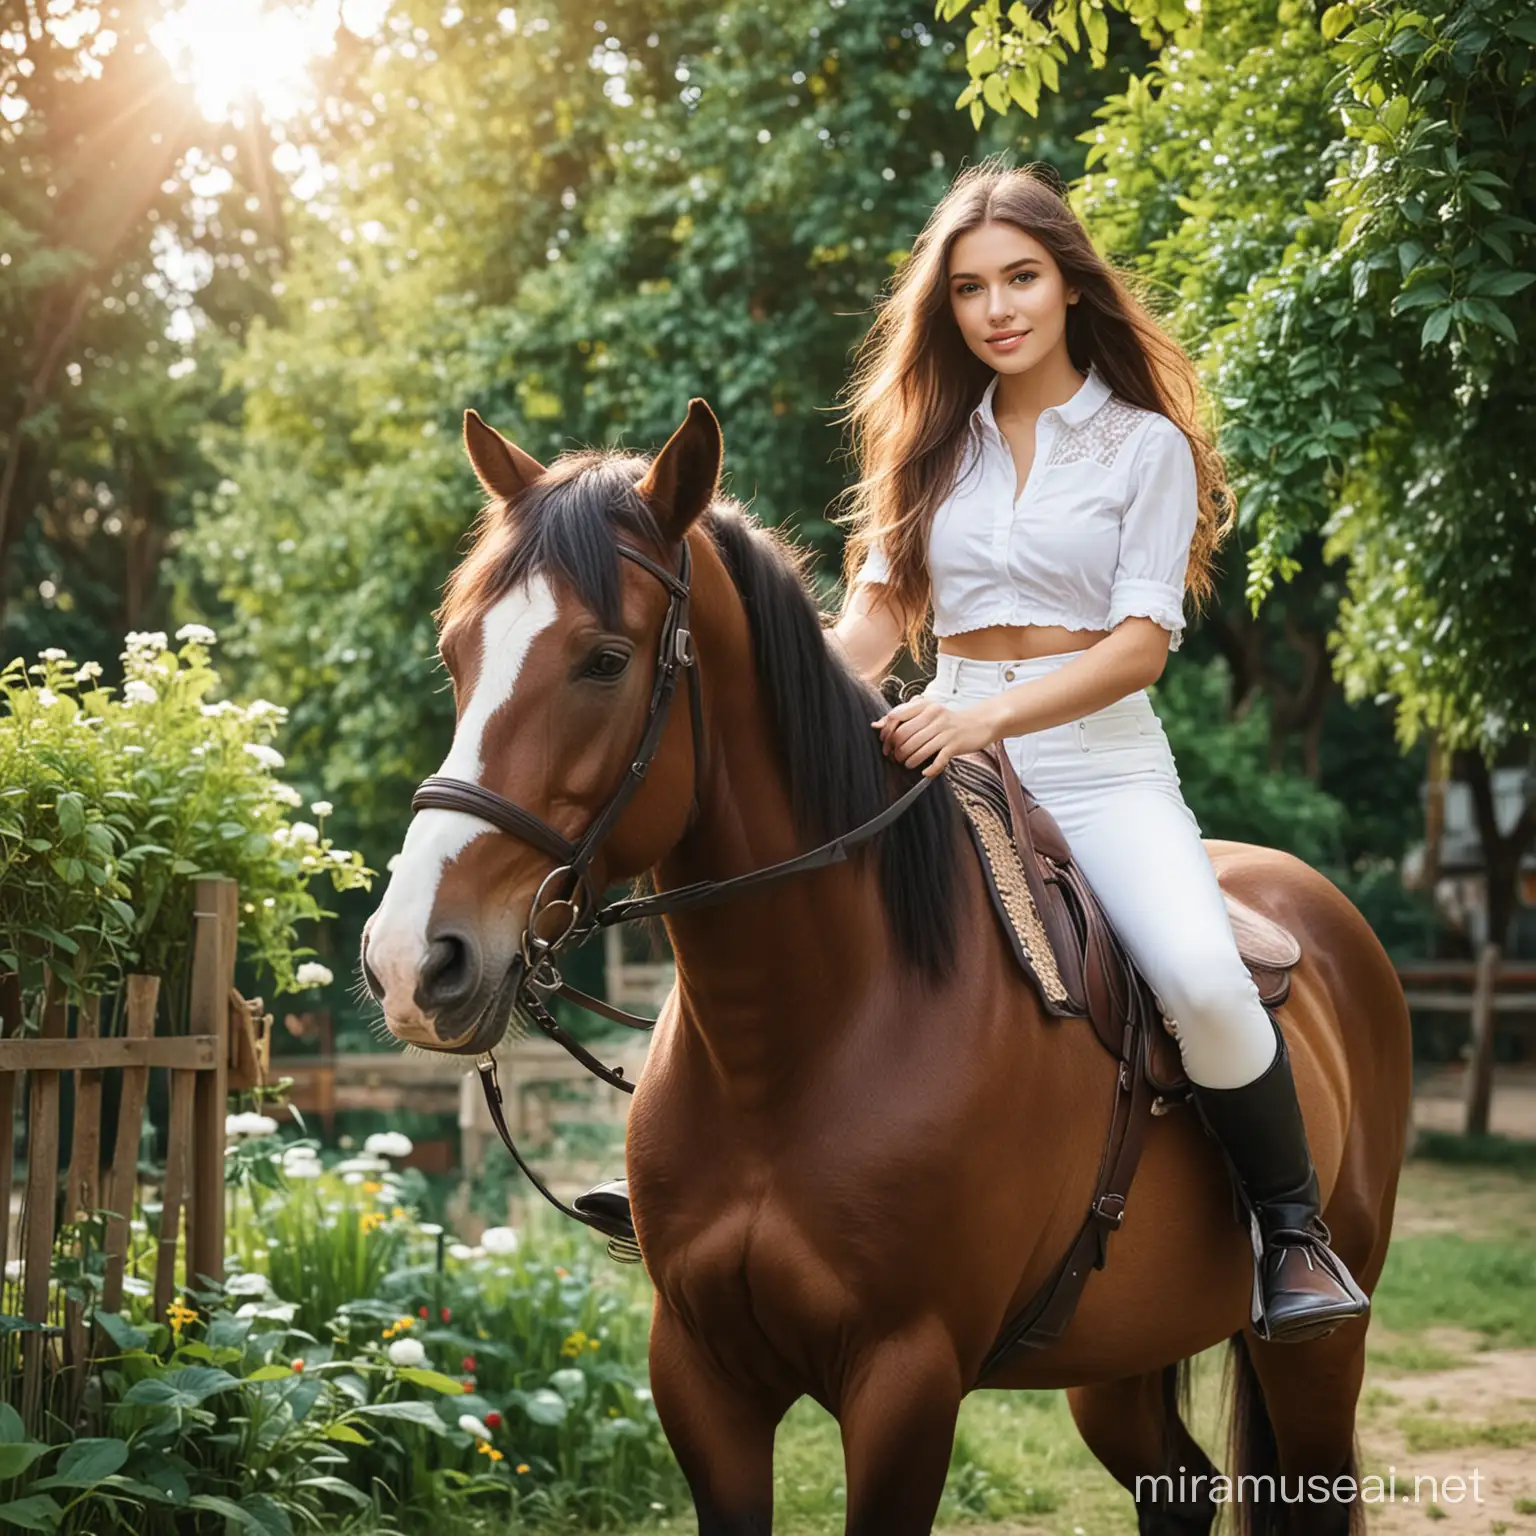 Beautiful girl sit on horse in the garden